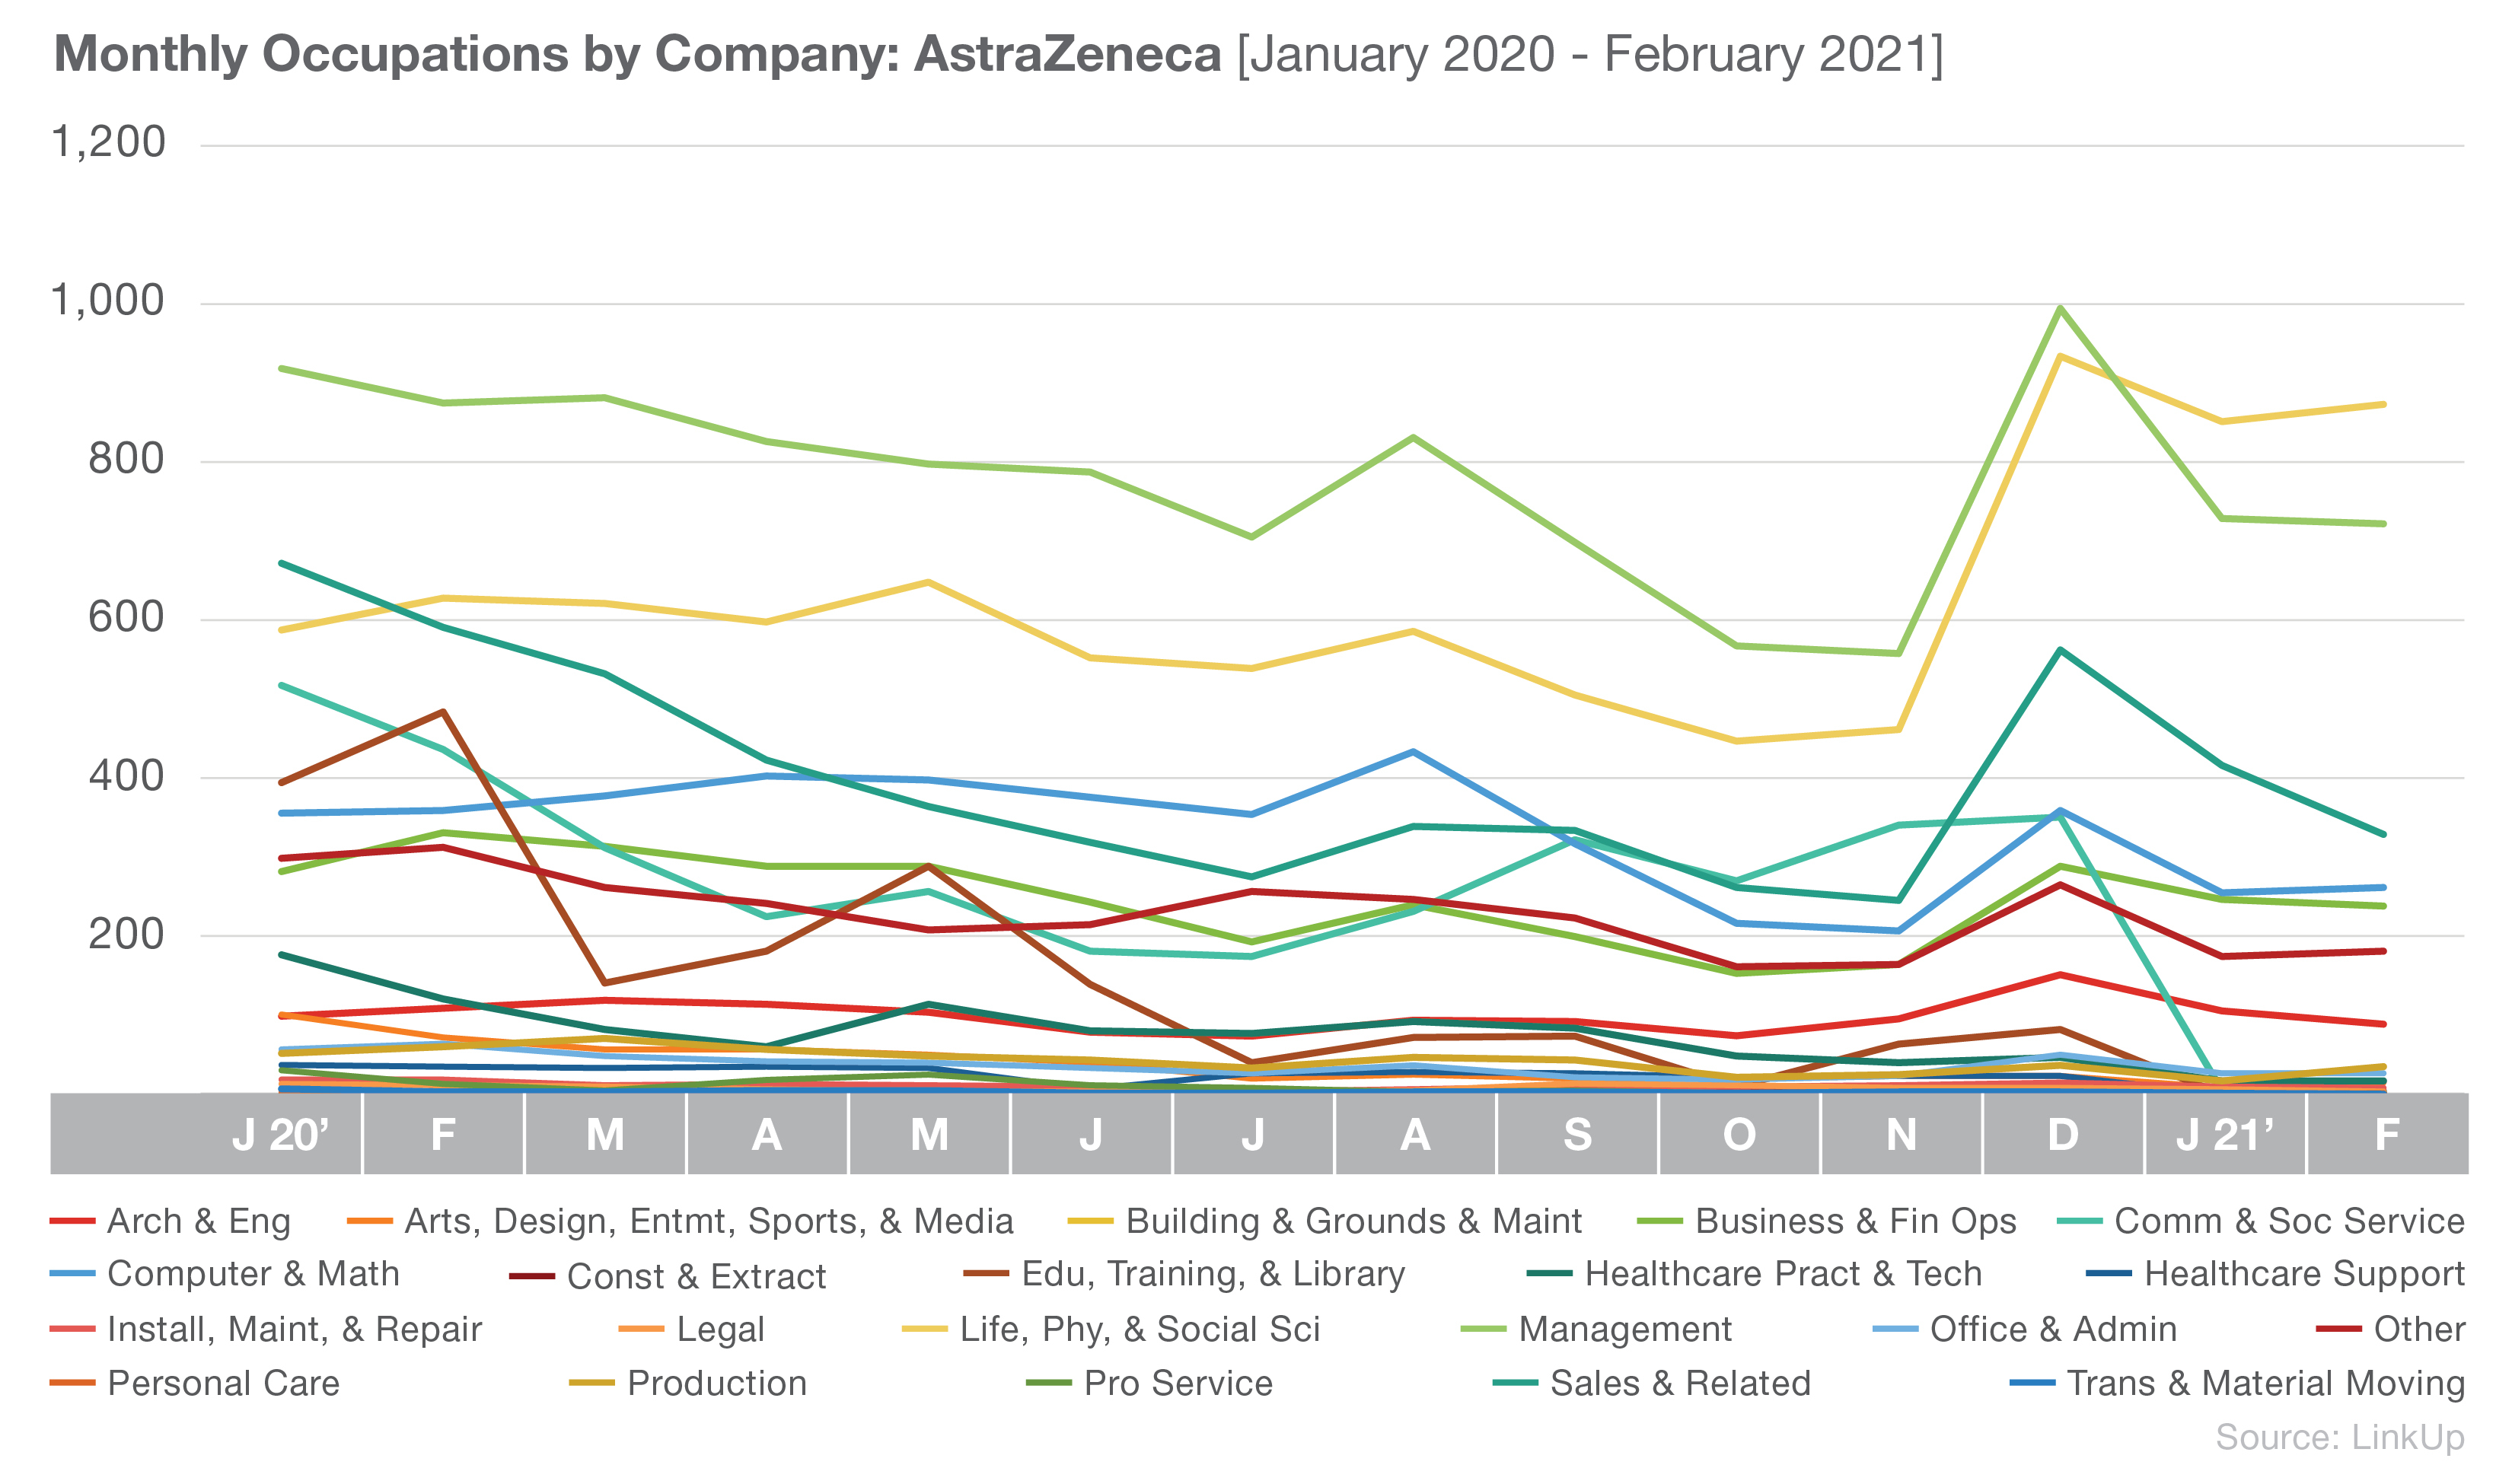 Monthly Occupations by Company - AstraZeneca